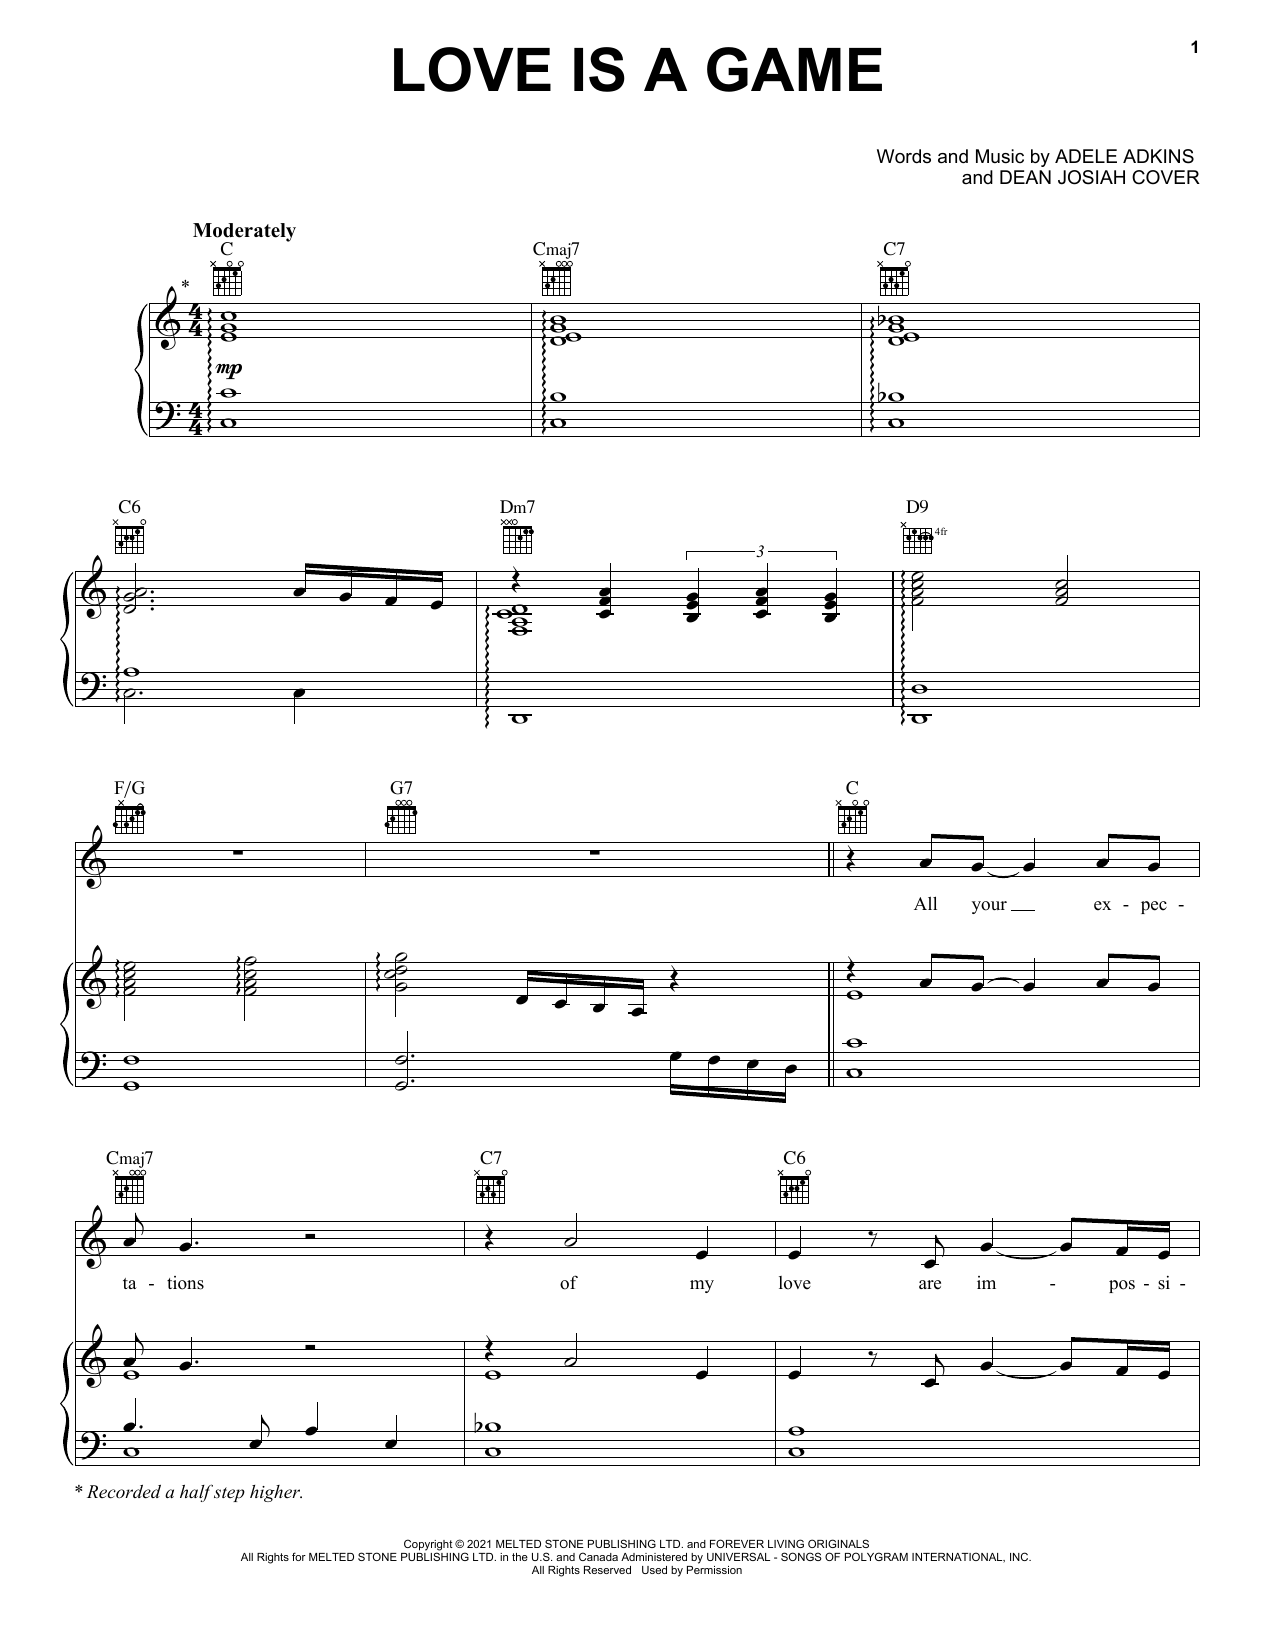 Adele Love Is A Game sheet music notes and chords. Download Printable PDF.